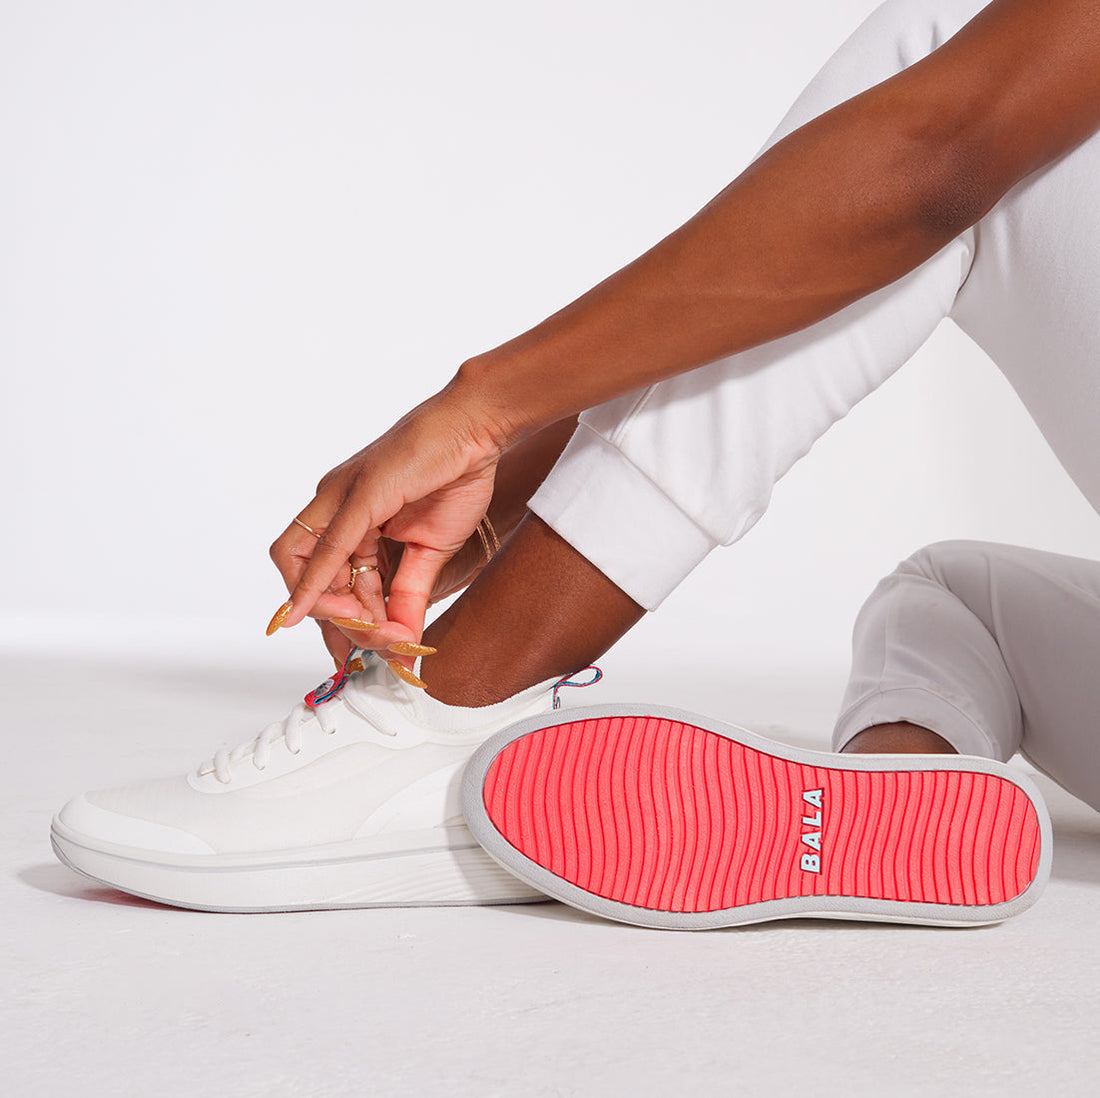 A Black woman sits on the floor to adjust her BALA Twelves in Flow White, which are bright white athletic-style sneakers for nurses and healthcare workers. Her hands are adorned with gold rings and bracelets, and long, polished nails. She is wearing white, jogger-style scrub bottoms. One foot is on the floor; she is adjusting the tongue of the shoe on this foot. Her other leg falls to the side so that the sole of her shoe is visible; it has a bright red sole with a sky blue BALA logo.